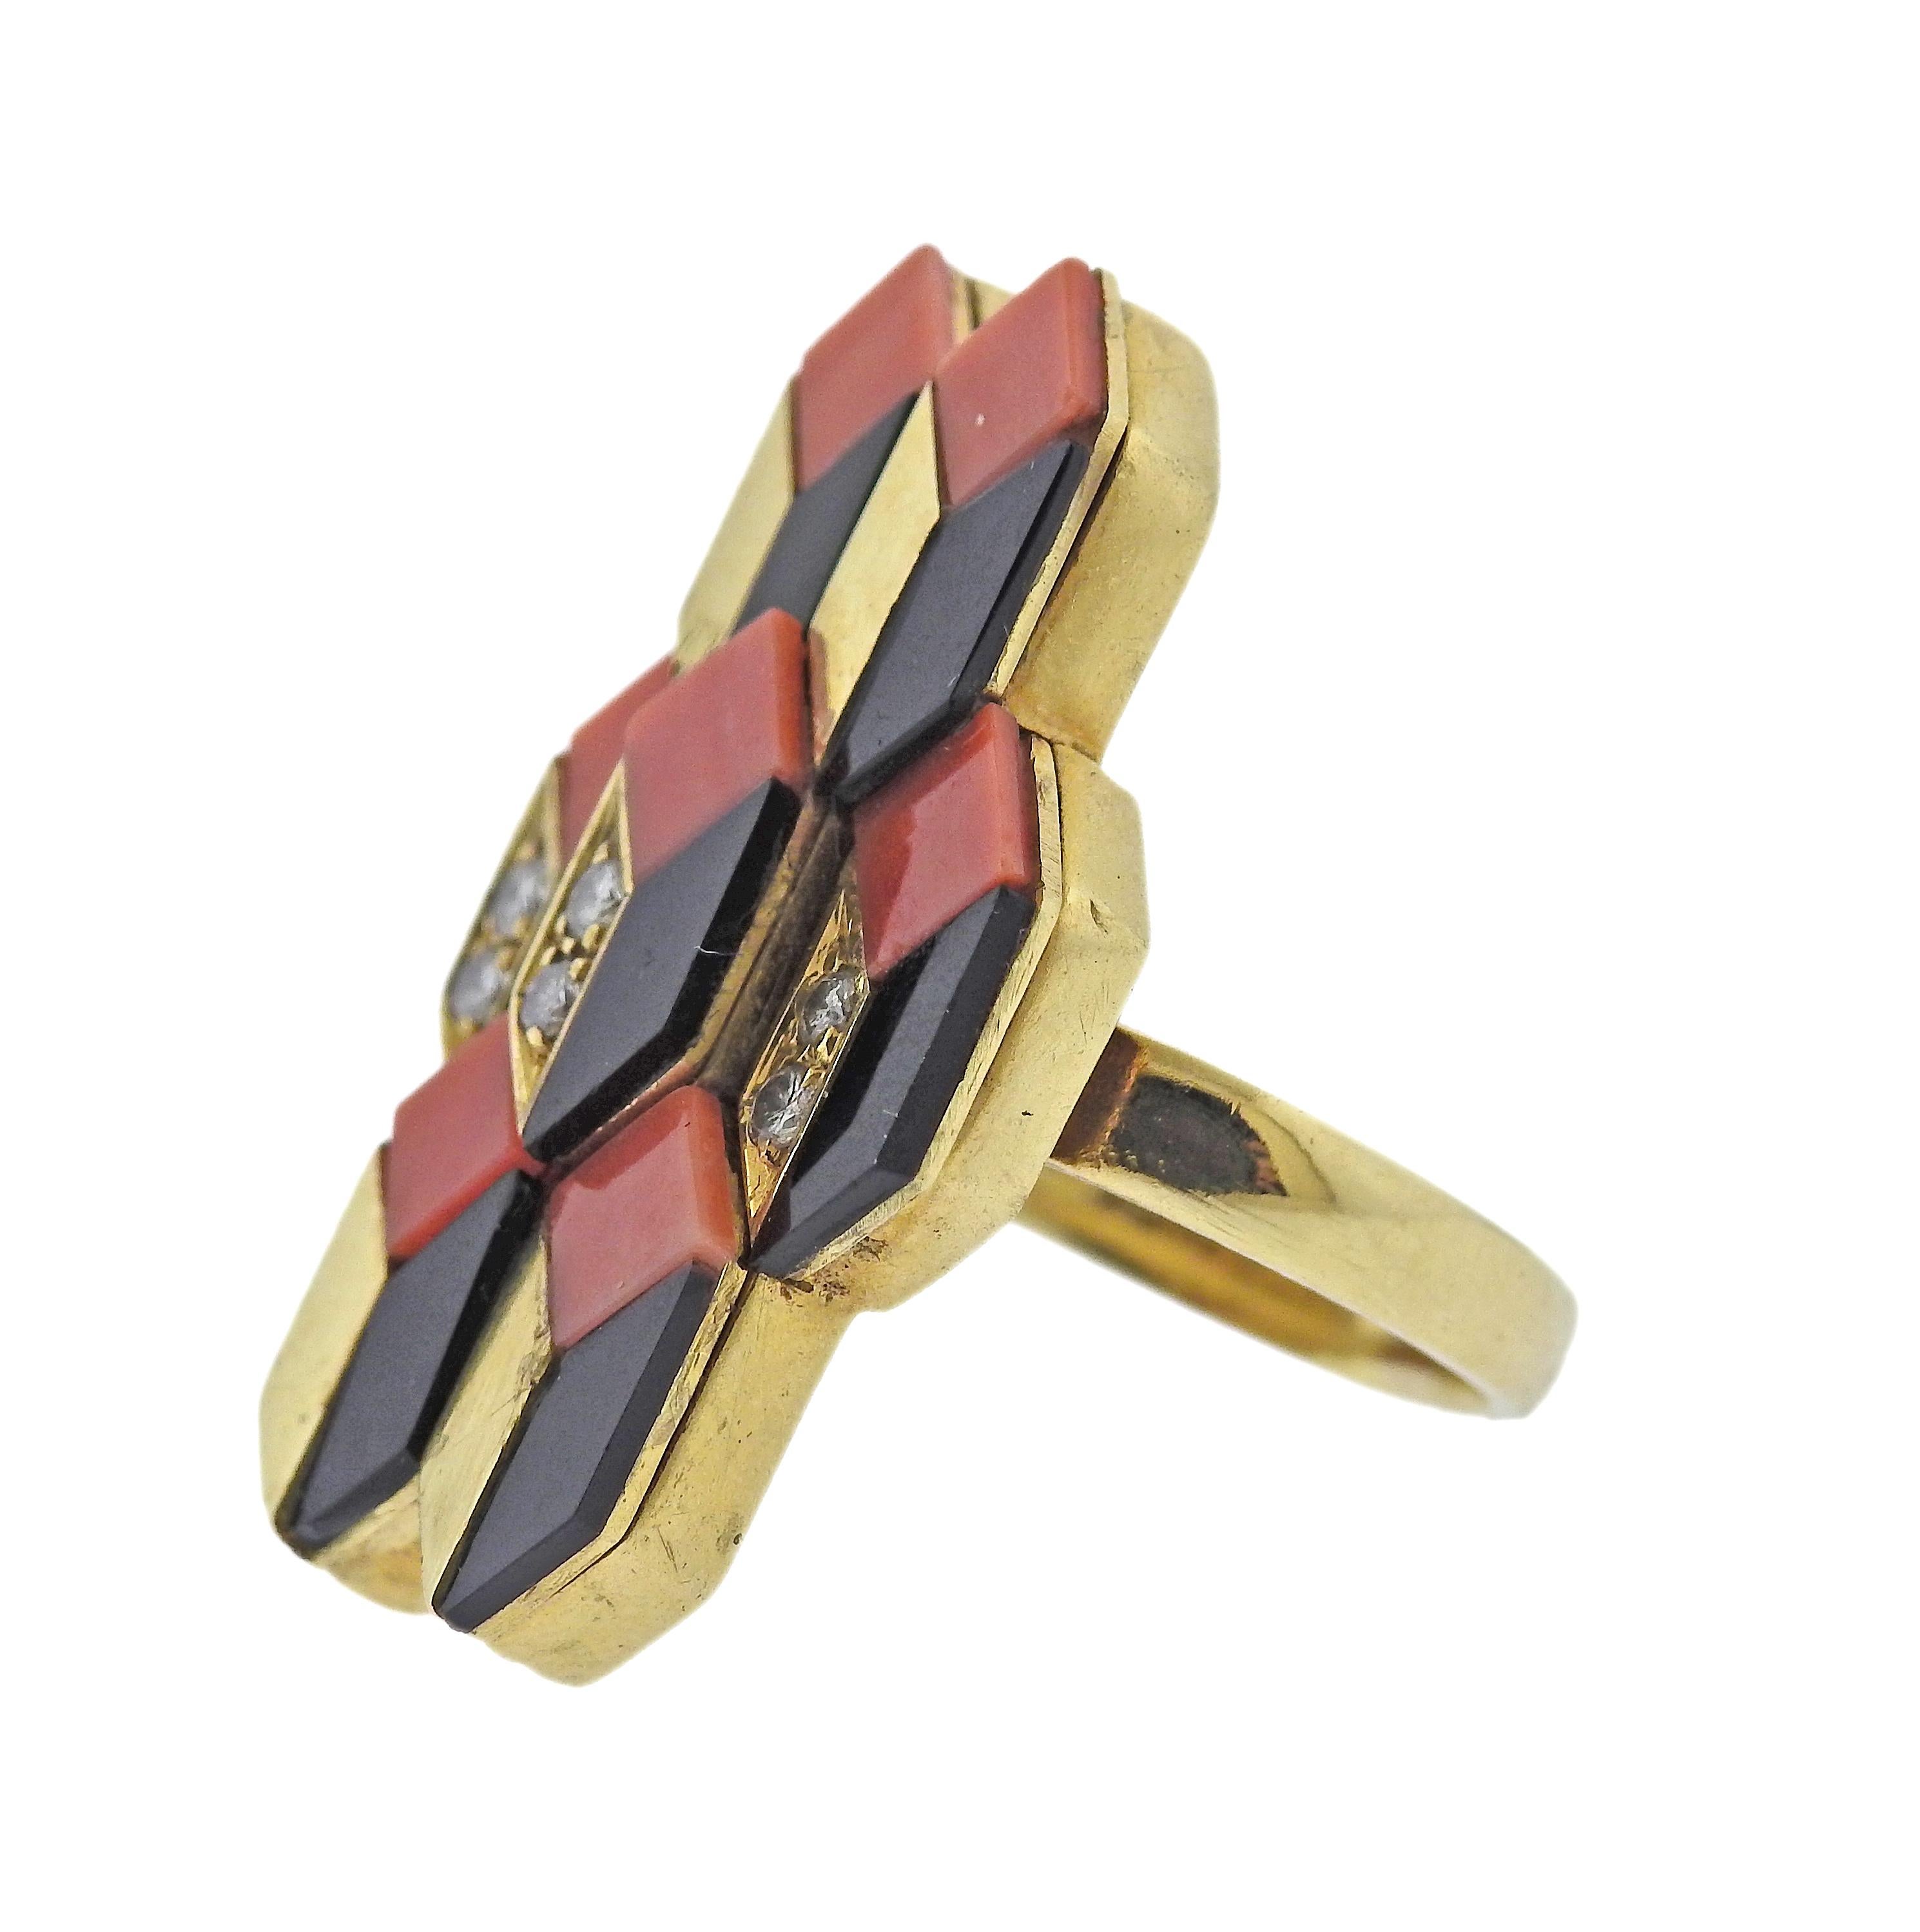 1970s, 18k gold ring by Spritzer & Fuhrmann, set with inlayed coral and onyx, with approx. 0.12ctw H/VS diamonds. Ring size - 6.5, ring top is 31mm x 20mm. Marked: S+F, 18k, 3075, Italy. Weight - 17.6 grams.